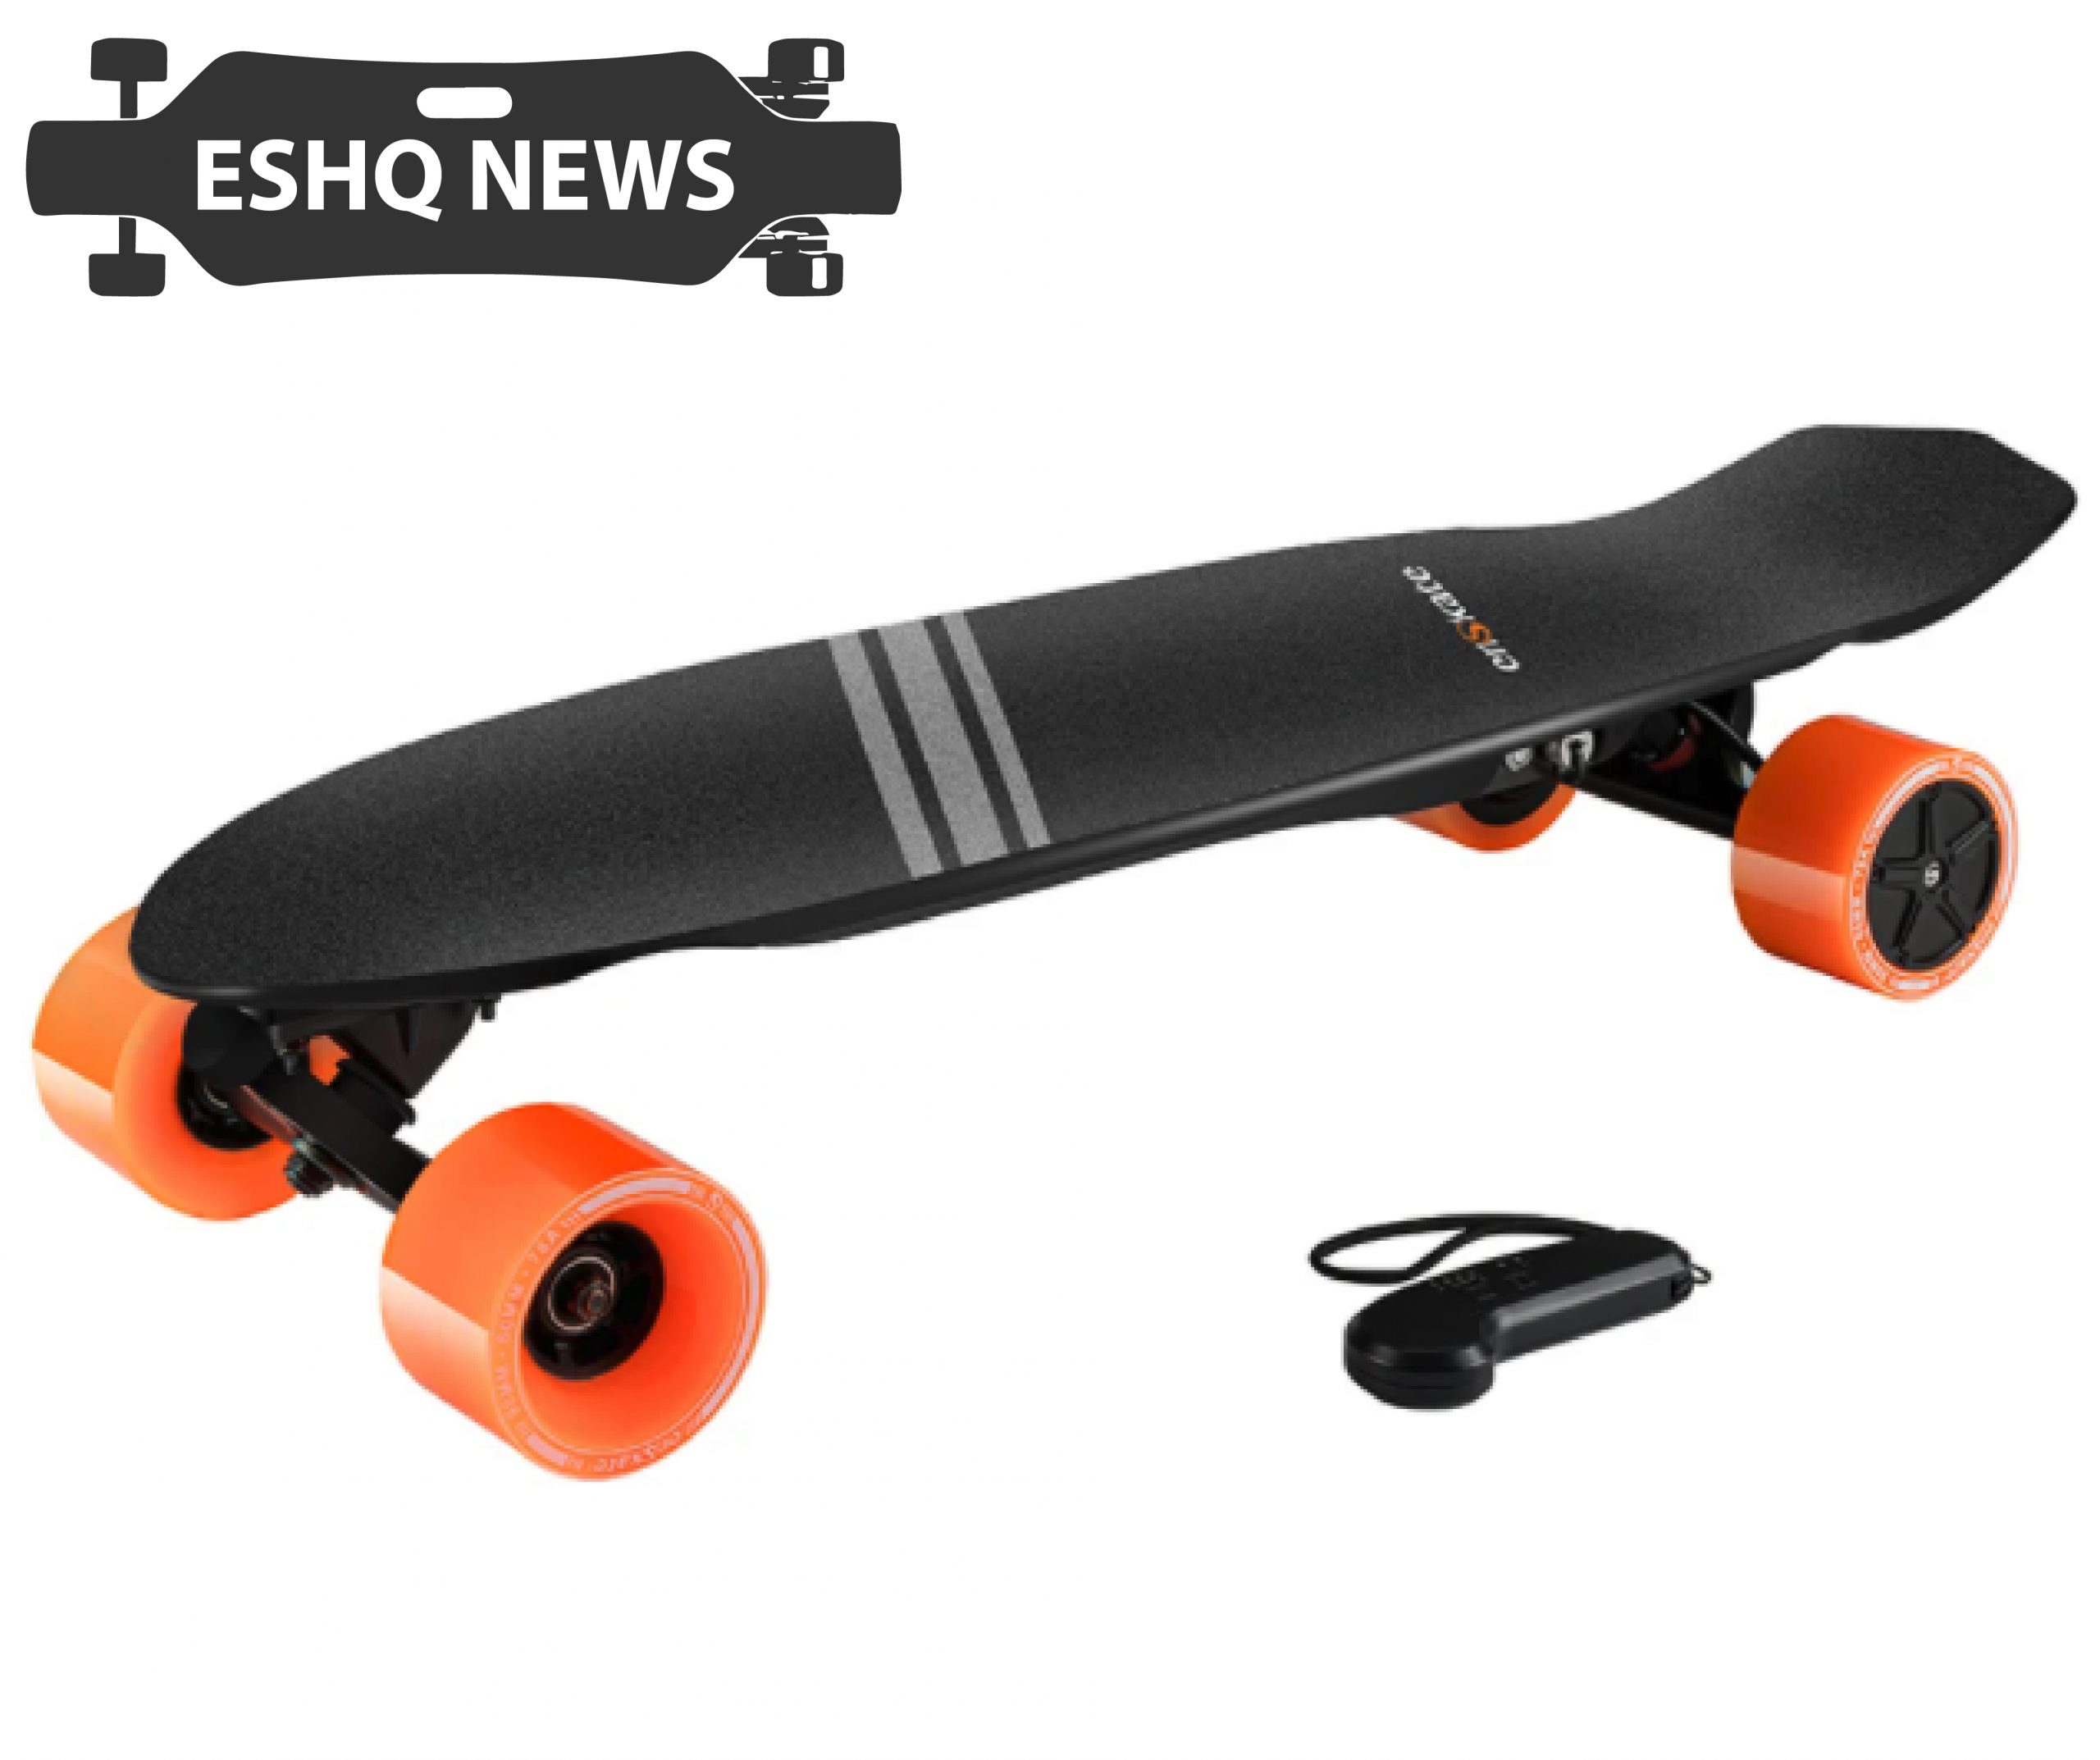 Enskate R3 Mini Preview – Will this be a good ‘campus’ board?